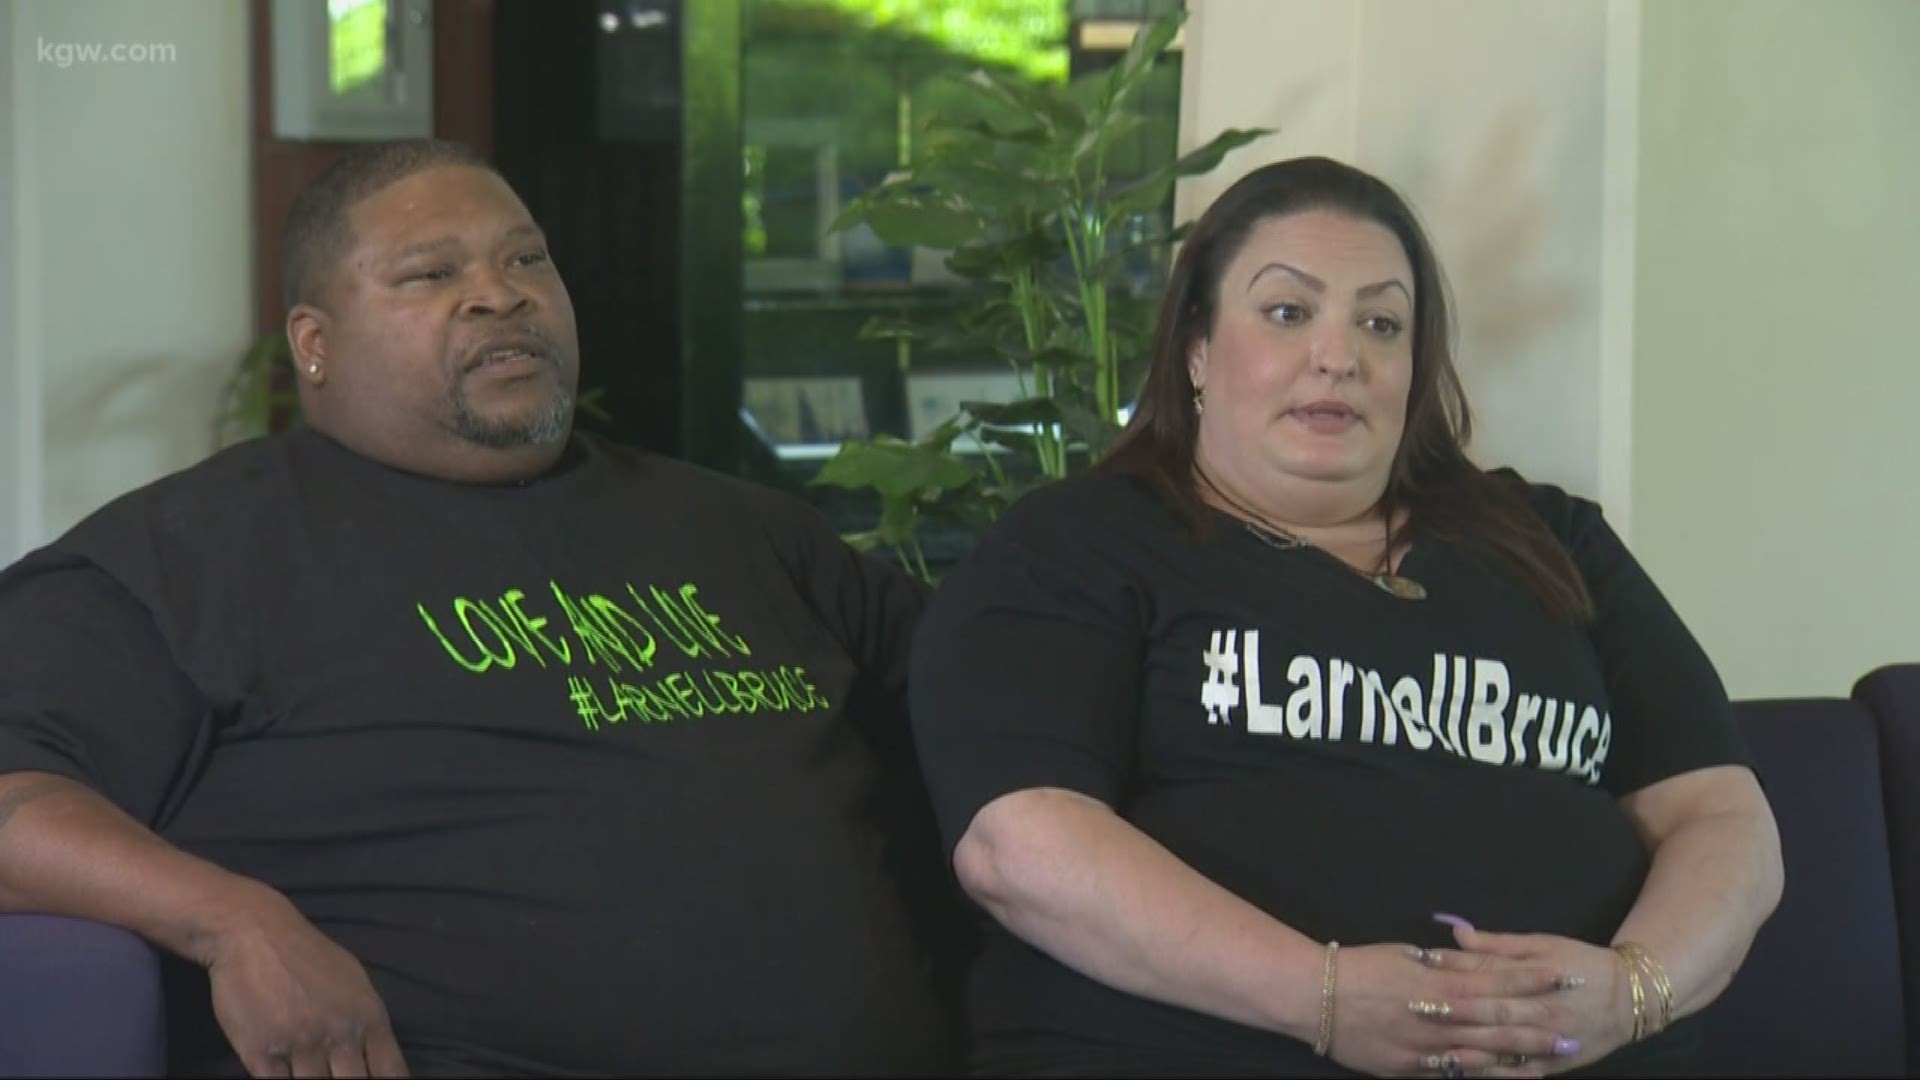 A mother and father whose son, Larnell Bruce, was killed because of the color of his skin in 2016, are now fighting to change Oregon's hate crime laws.